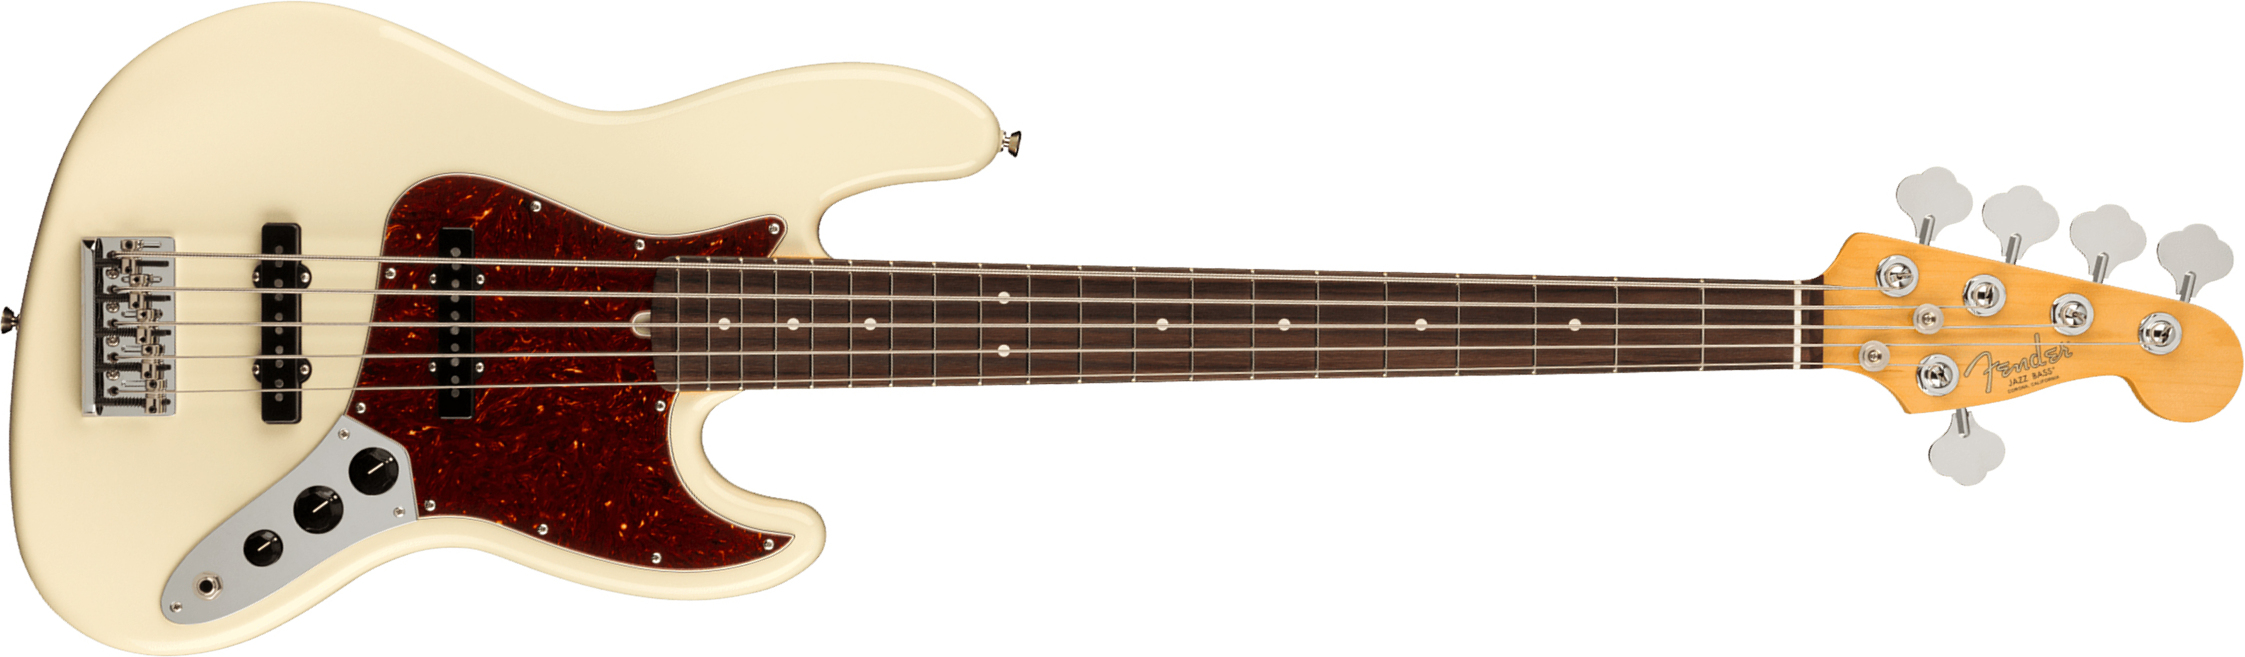 Fender Jazz Bass V American Professional Ii Usa 5-cordes Rw - Olympic White - Basse Électrique Solid Body - Main picture